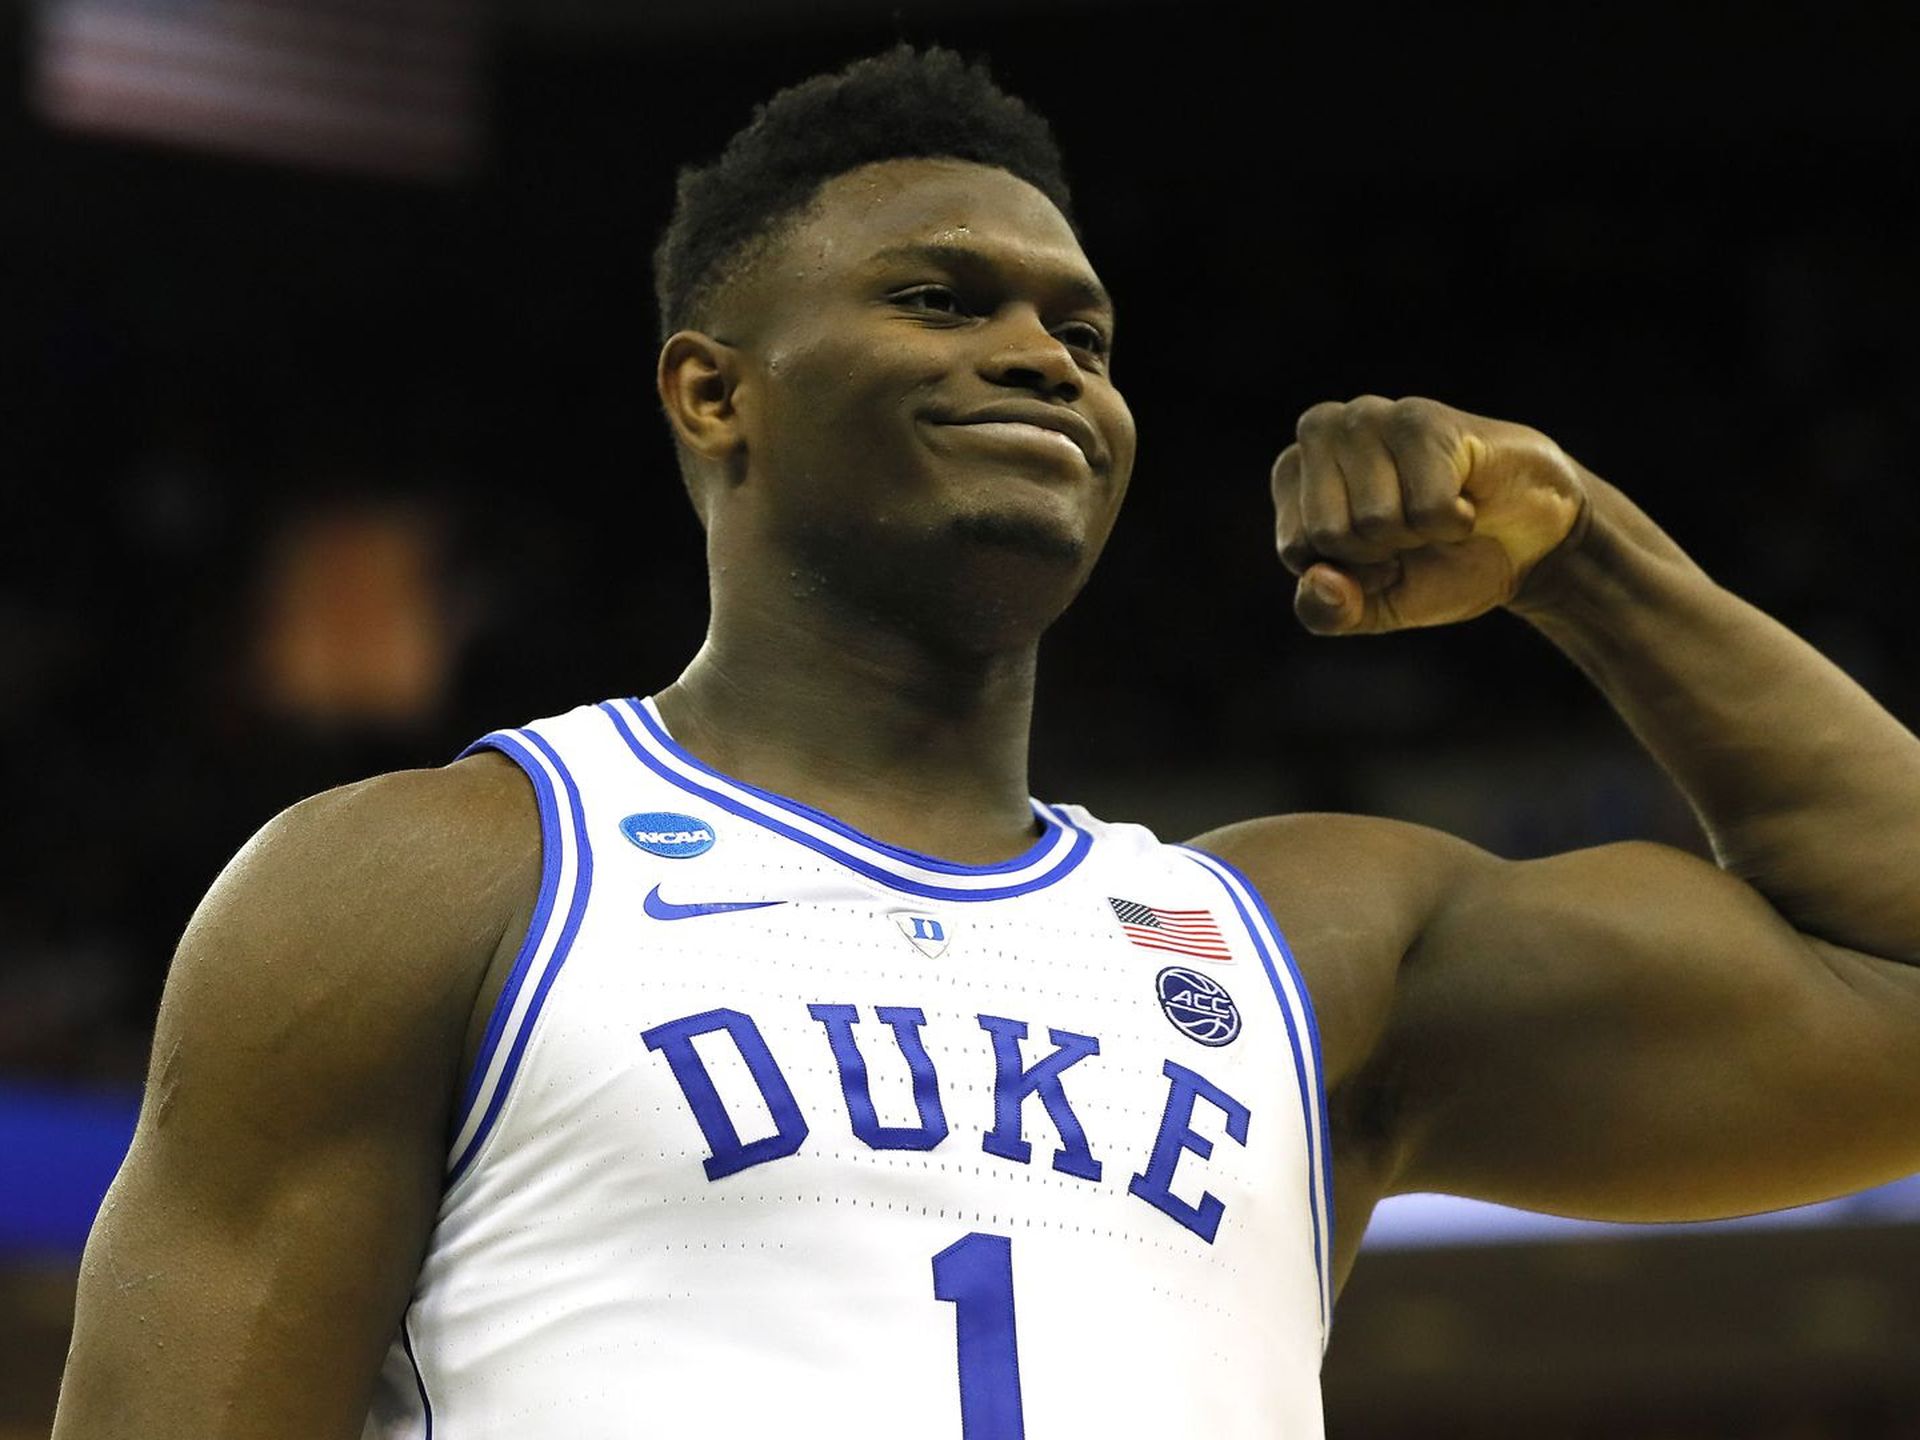 Zion Williamson's Former Agent Claims He Received Illegal Benefits